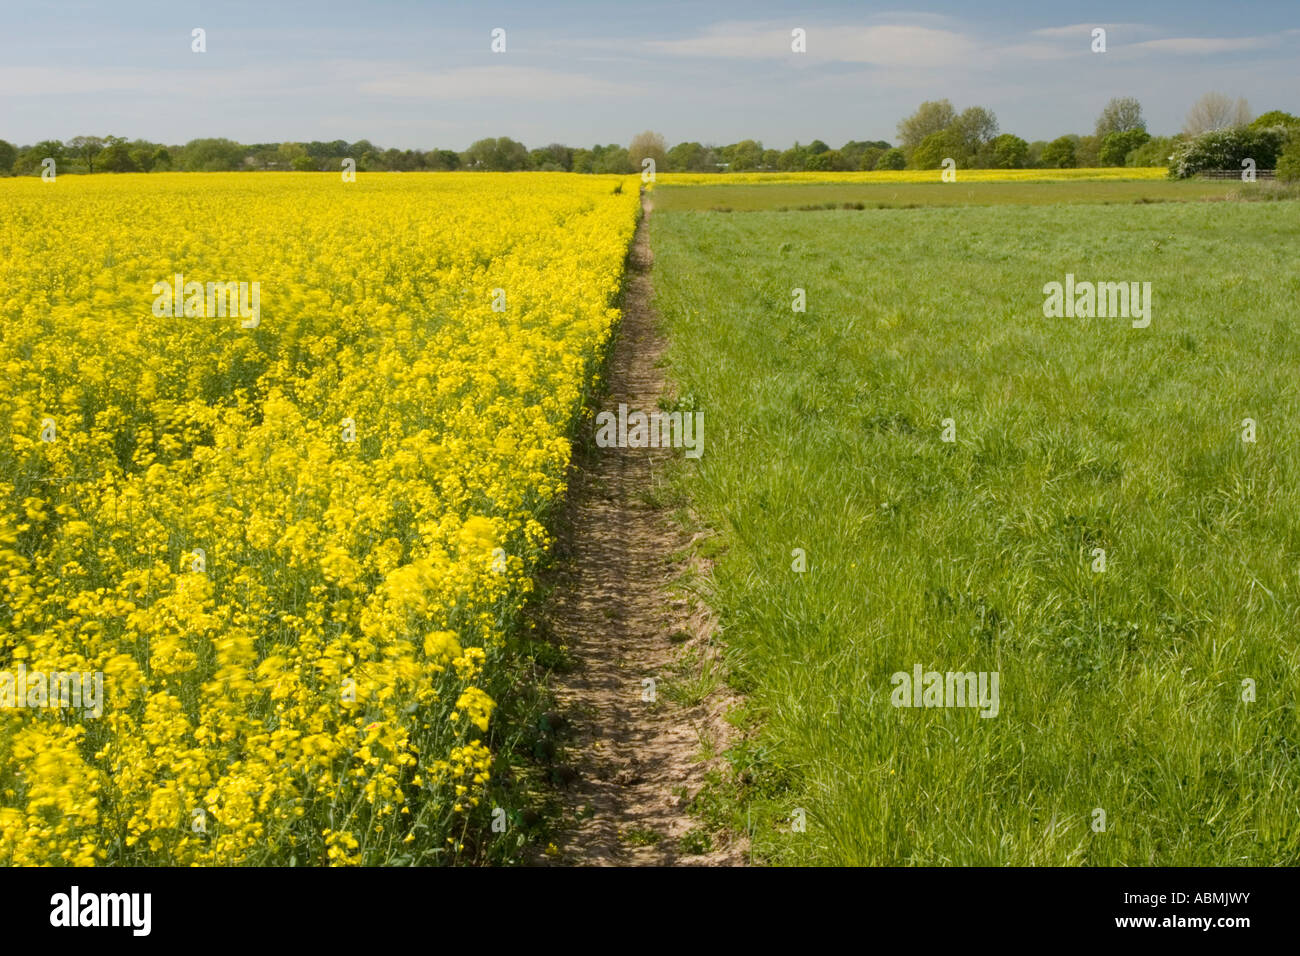 Field of brassica napus (rapeseed) next to a field of grass Stock Photo